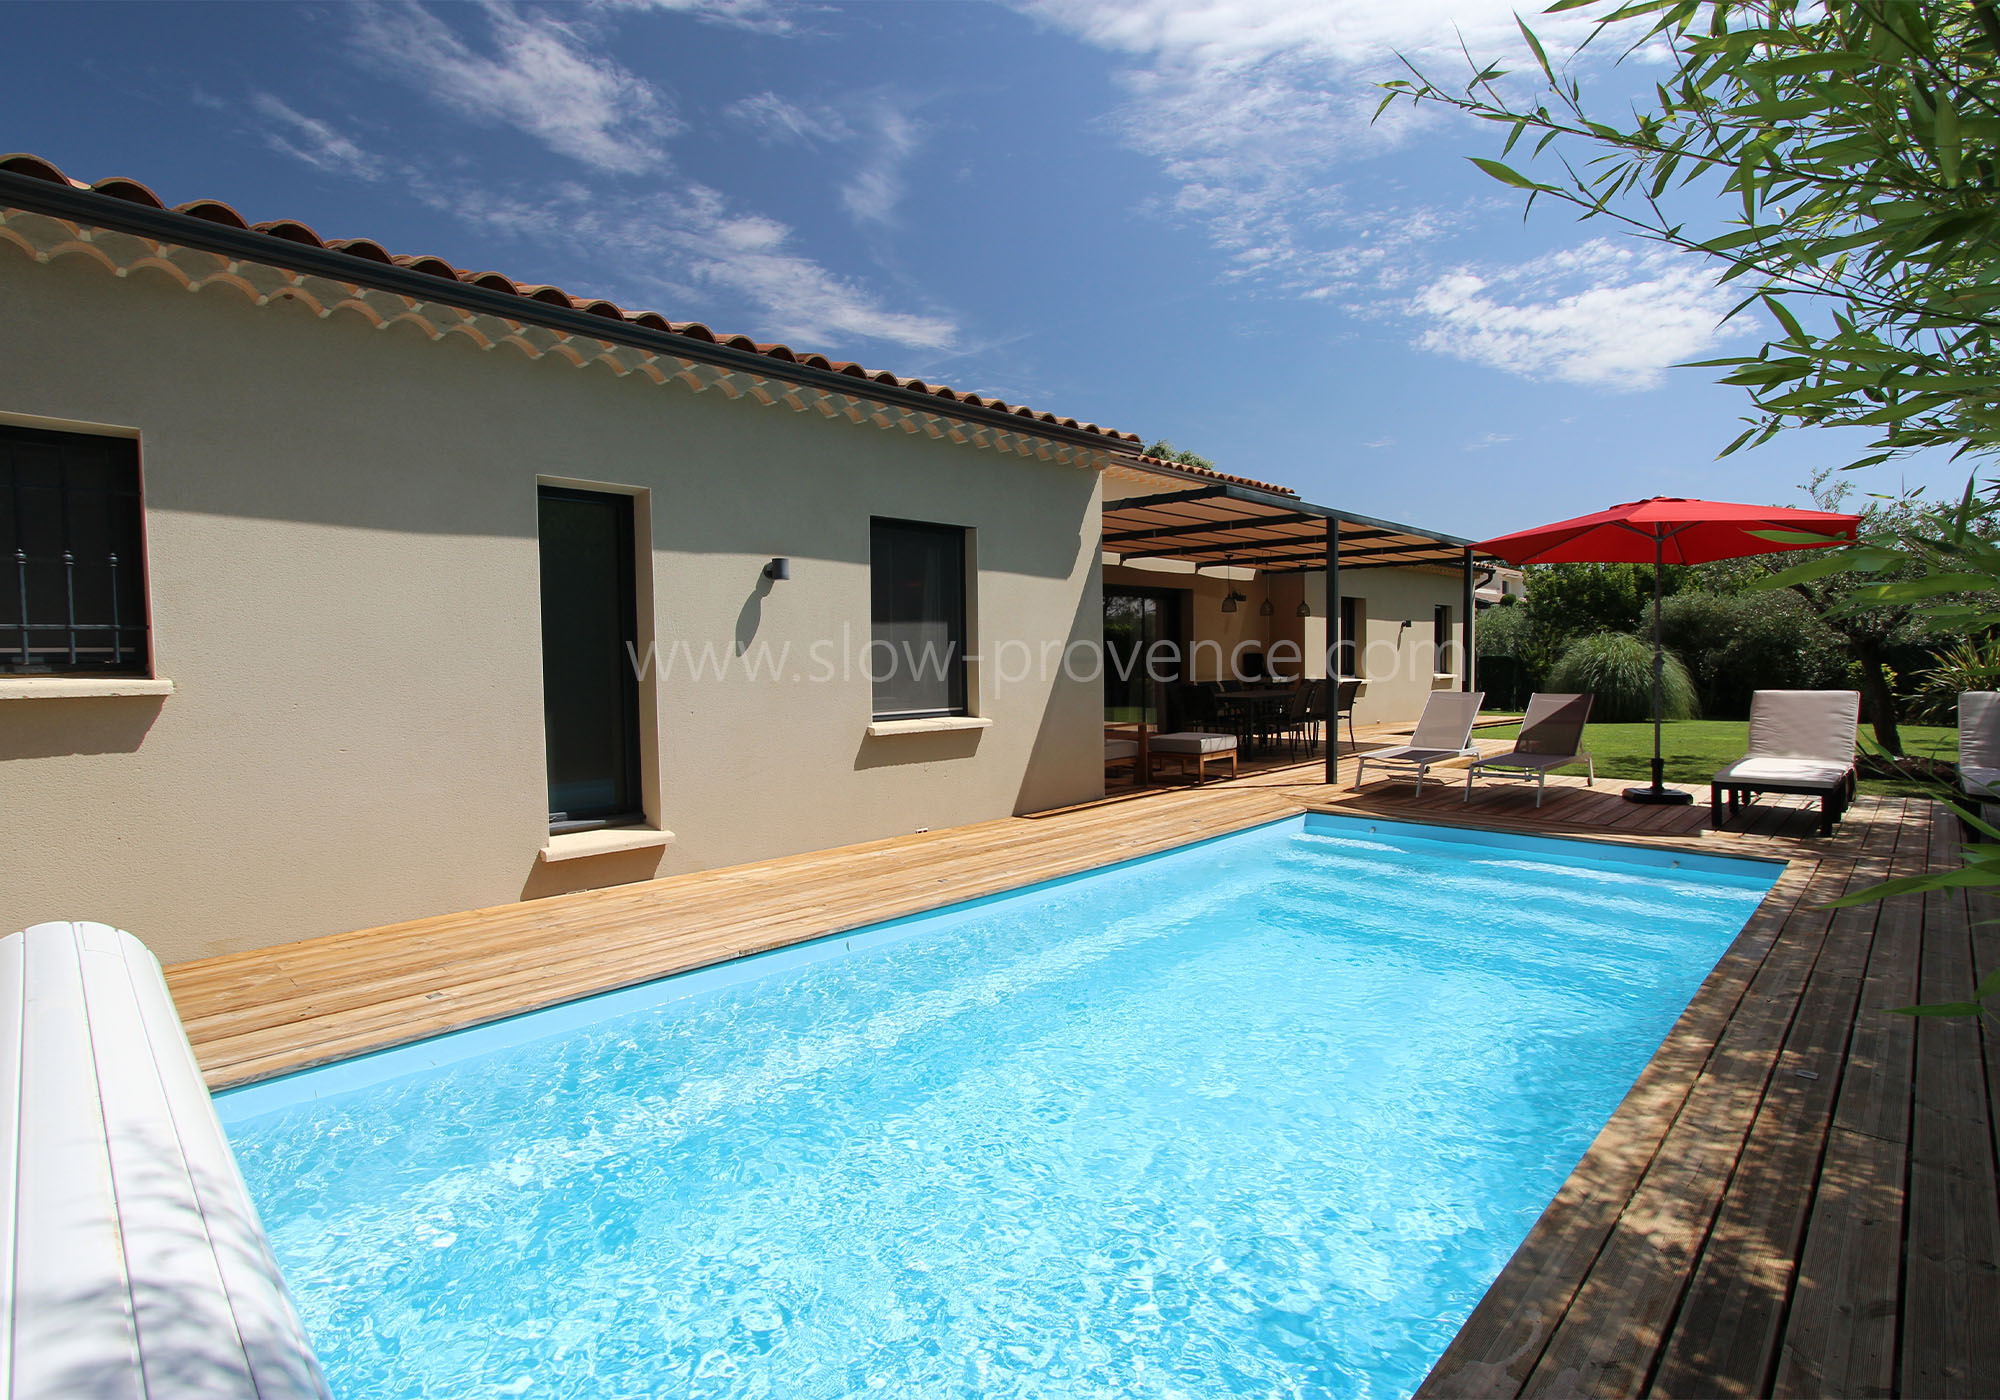 Nice modern villa with private heated pool